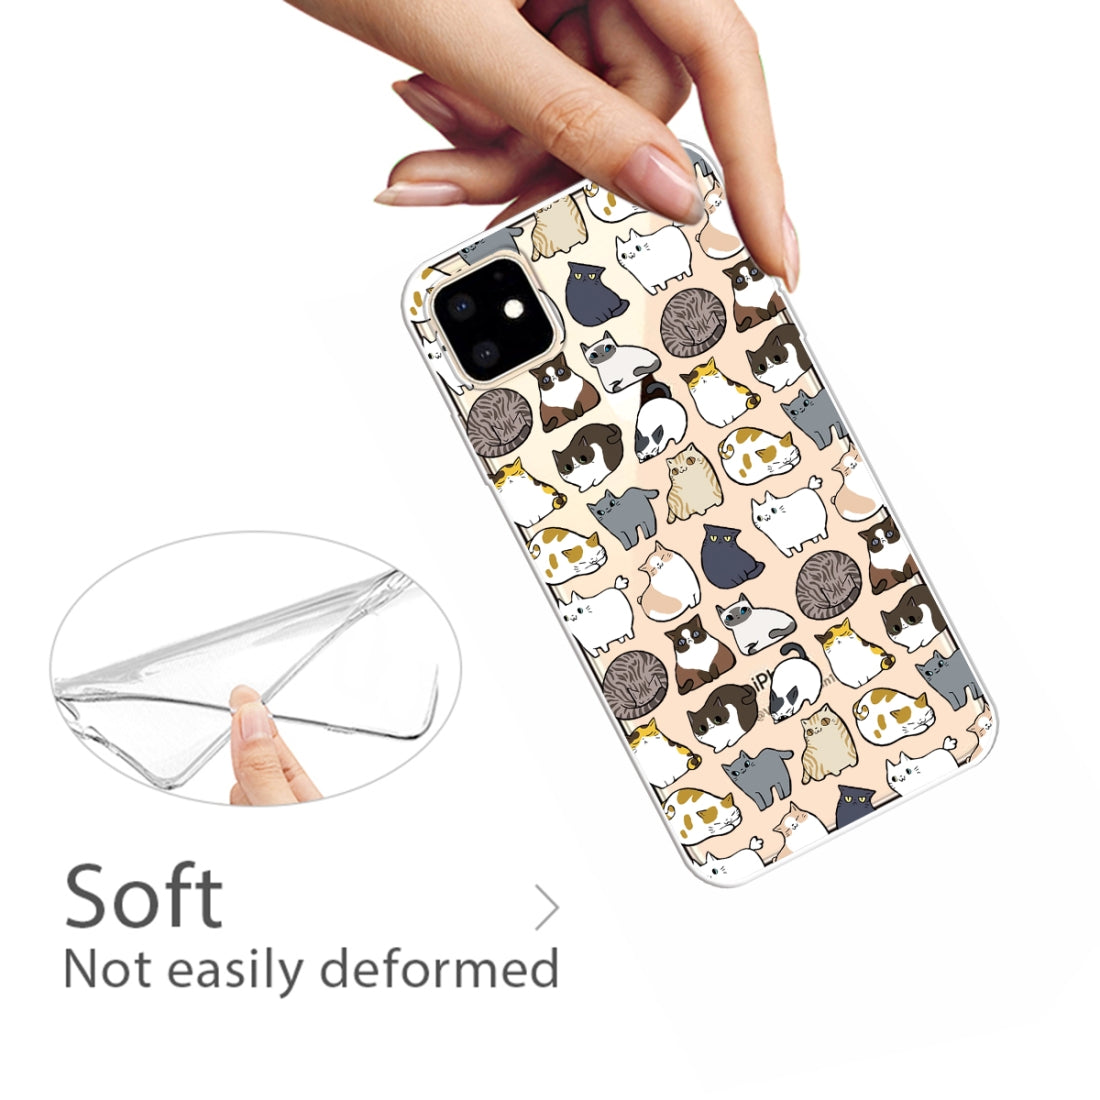 3D Pattern Printing Soft TPU Cell Phone Cover Case For iPhone 11(Minicat)